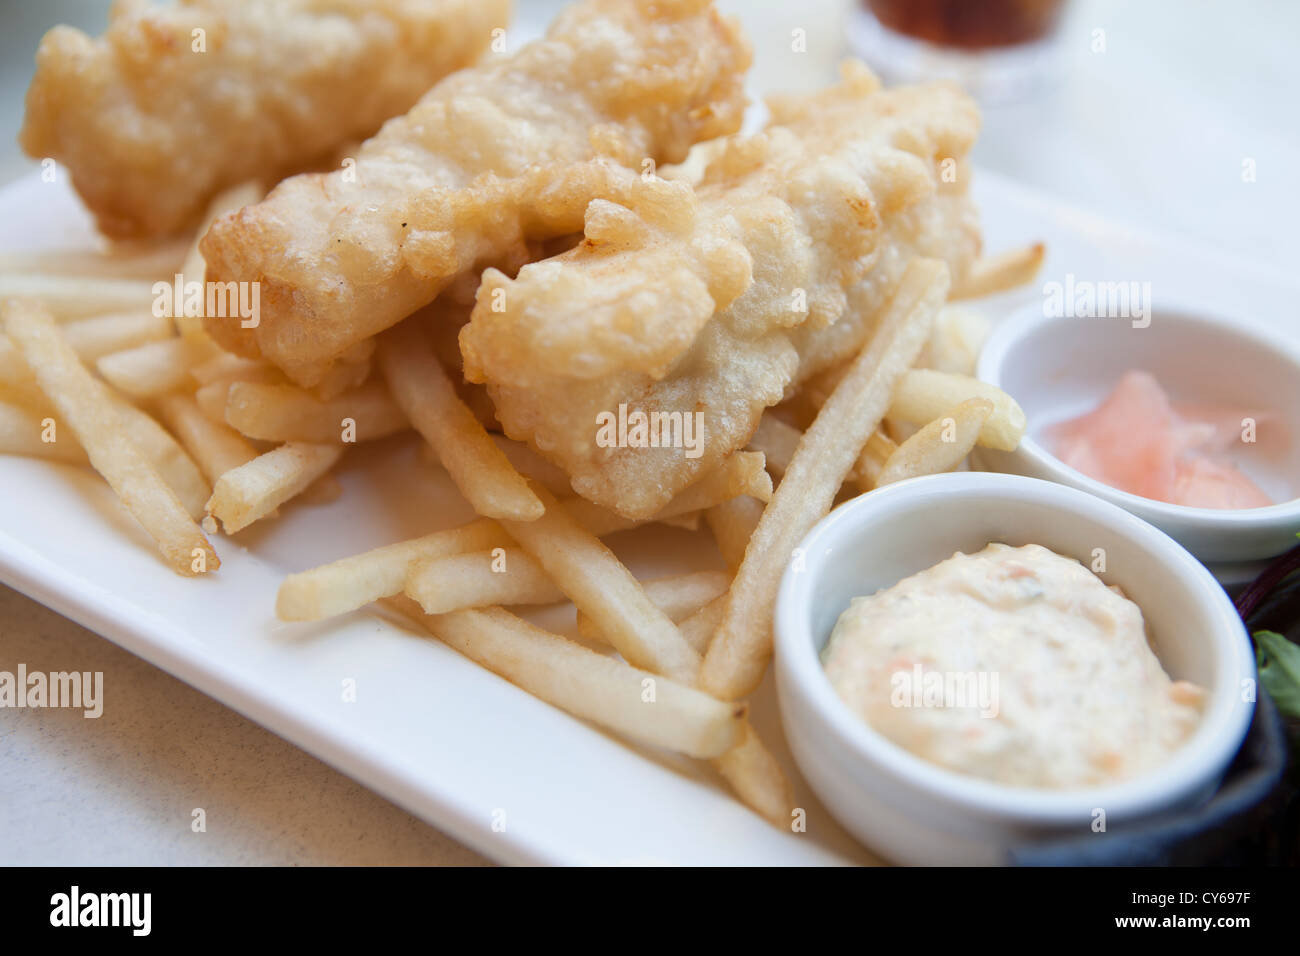 Tempura fish and chips from the Deck bar in Darwin, Northern Territory ...